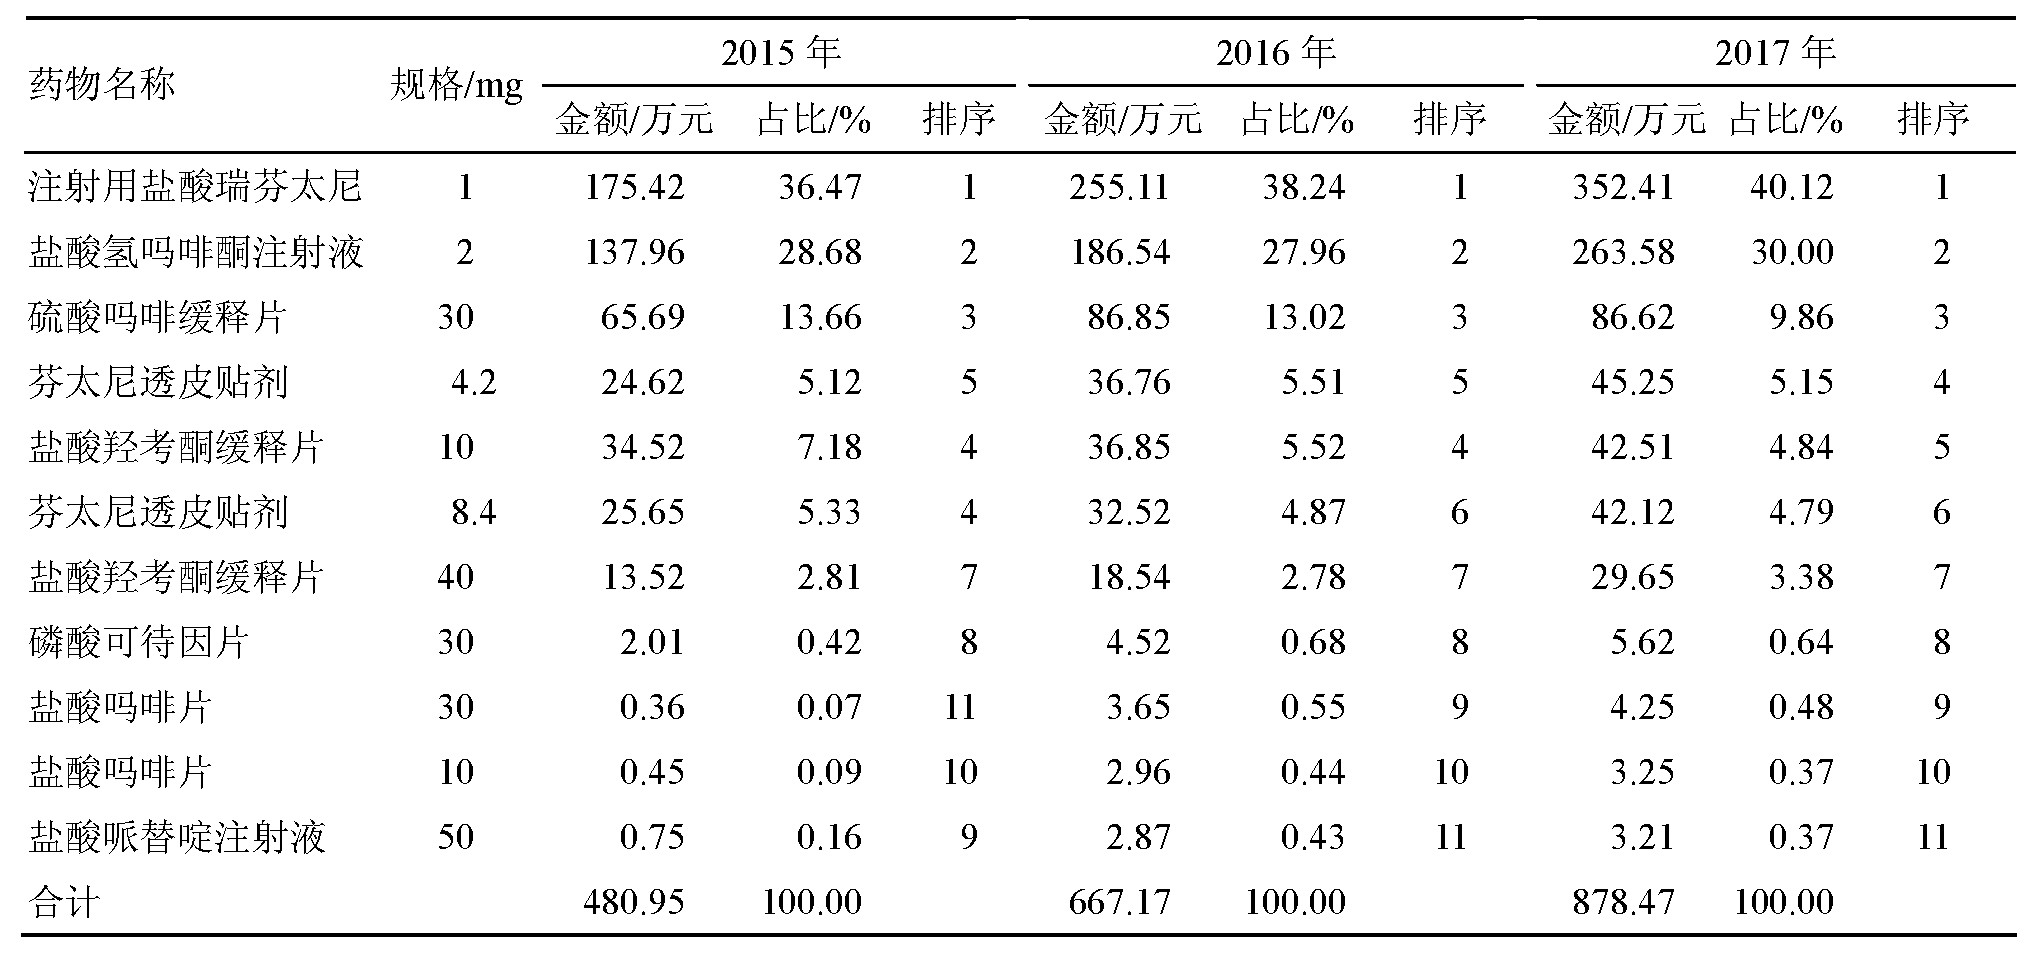 1 20152017ʹҩ۽Table 1 Consumption sum and ranks of narcotic analgesic drugs from 2015 to 2017